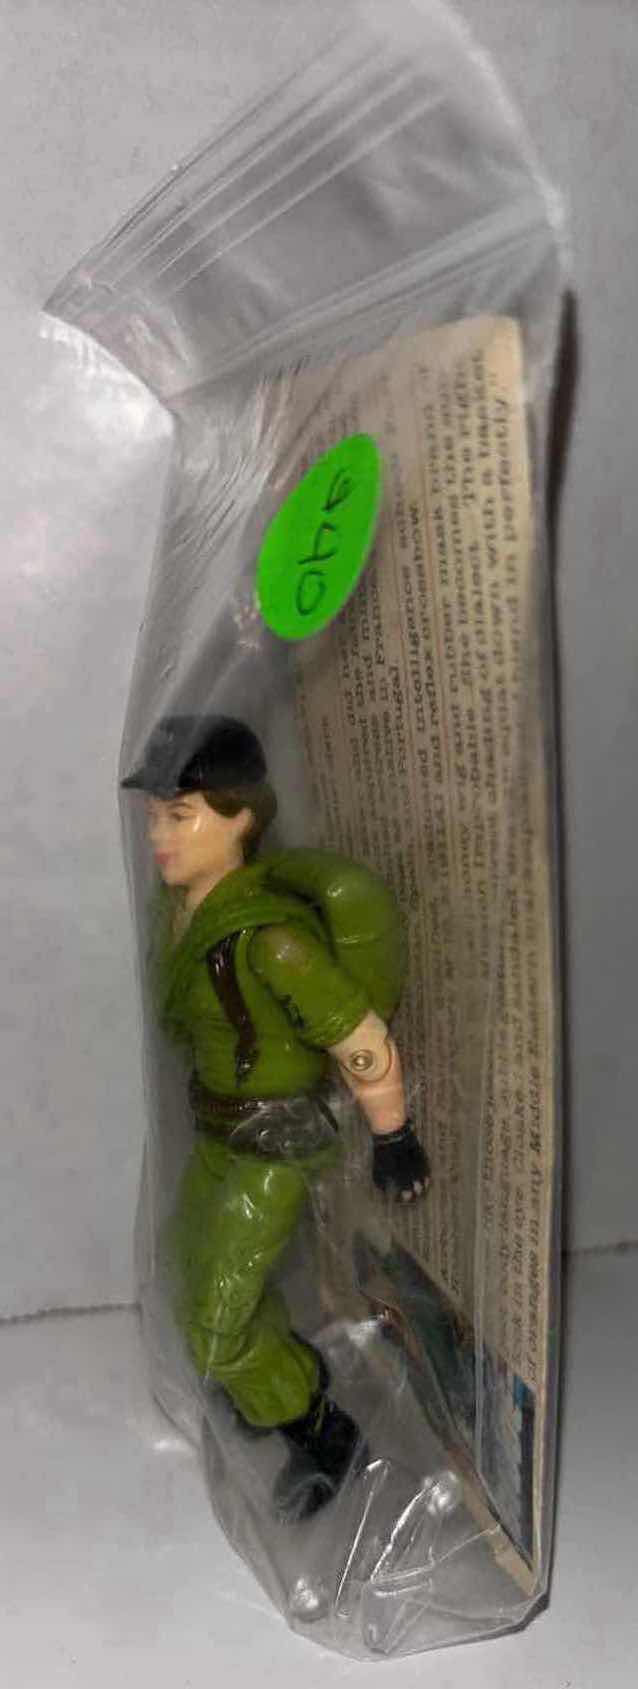 Photo 3 of VINTAGE G.I. JOE 2-PACK ACTION FIGURES & ACCESSORIES, “1985 COVERT OPERATIONS: LADY JAYE & 1983 FIRST SERGEANT: DUKE” INCLUDES CHARACTER FILE CARDS **NO RETURNS**